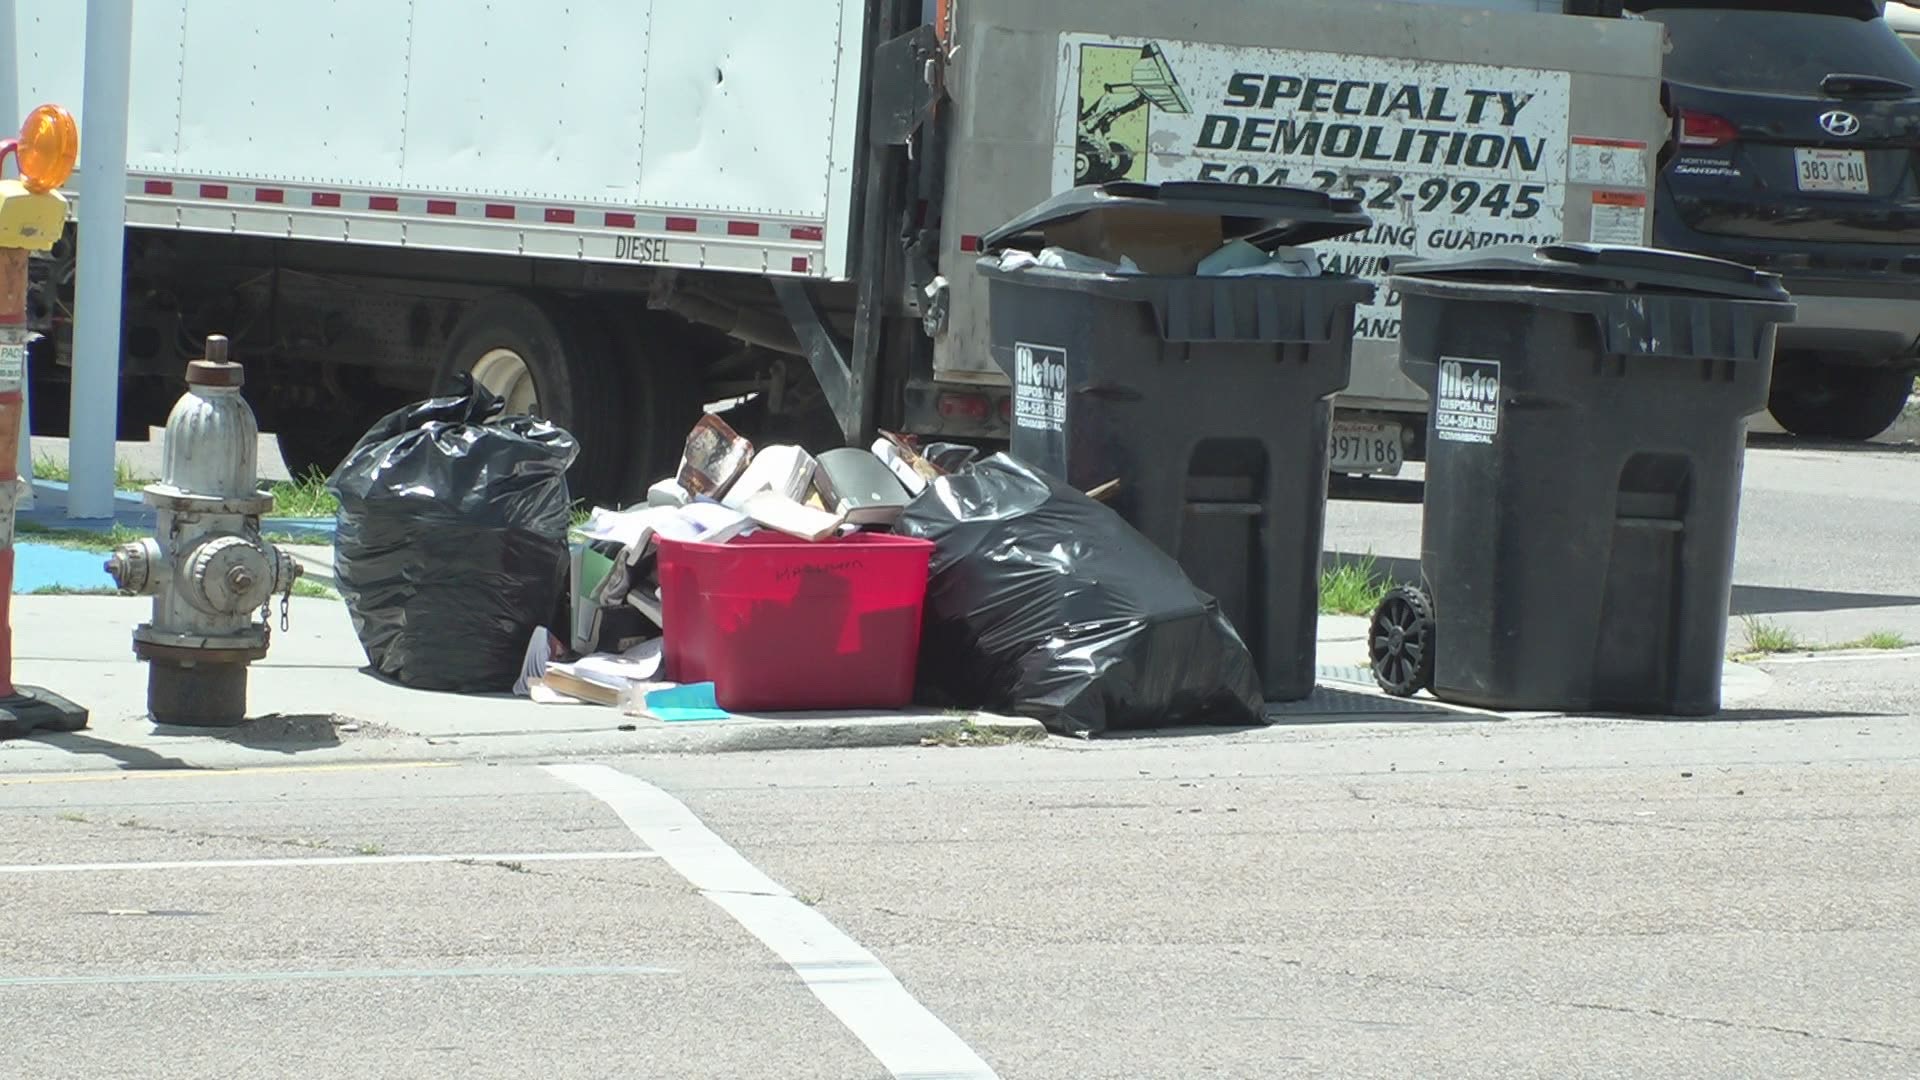 Residents are fed up as the trash is tardy in being picked up, leaving smelly and unsightly messes around the city.